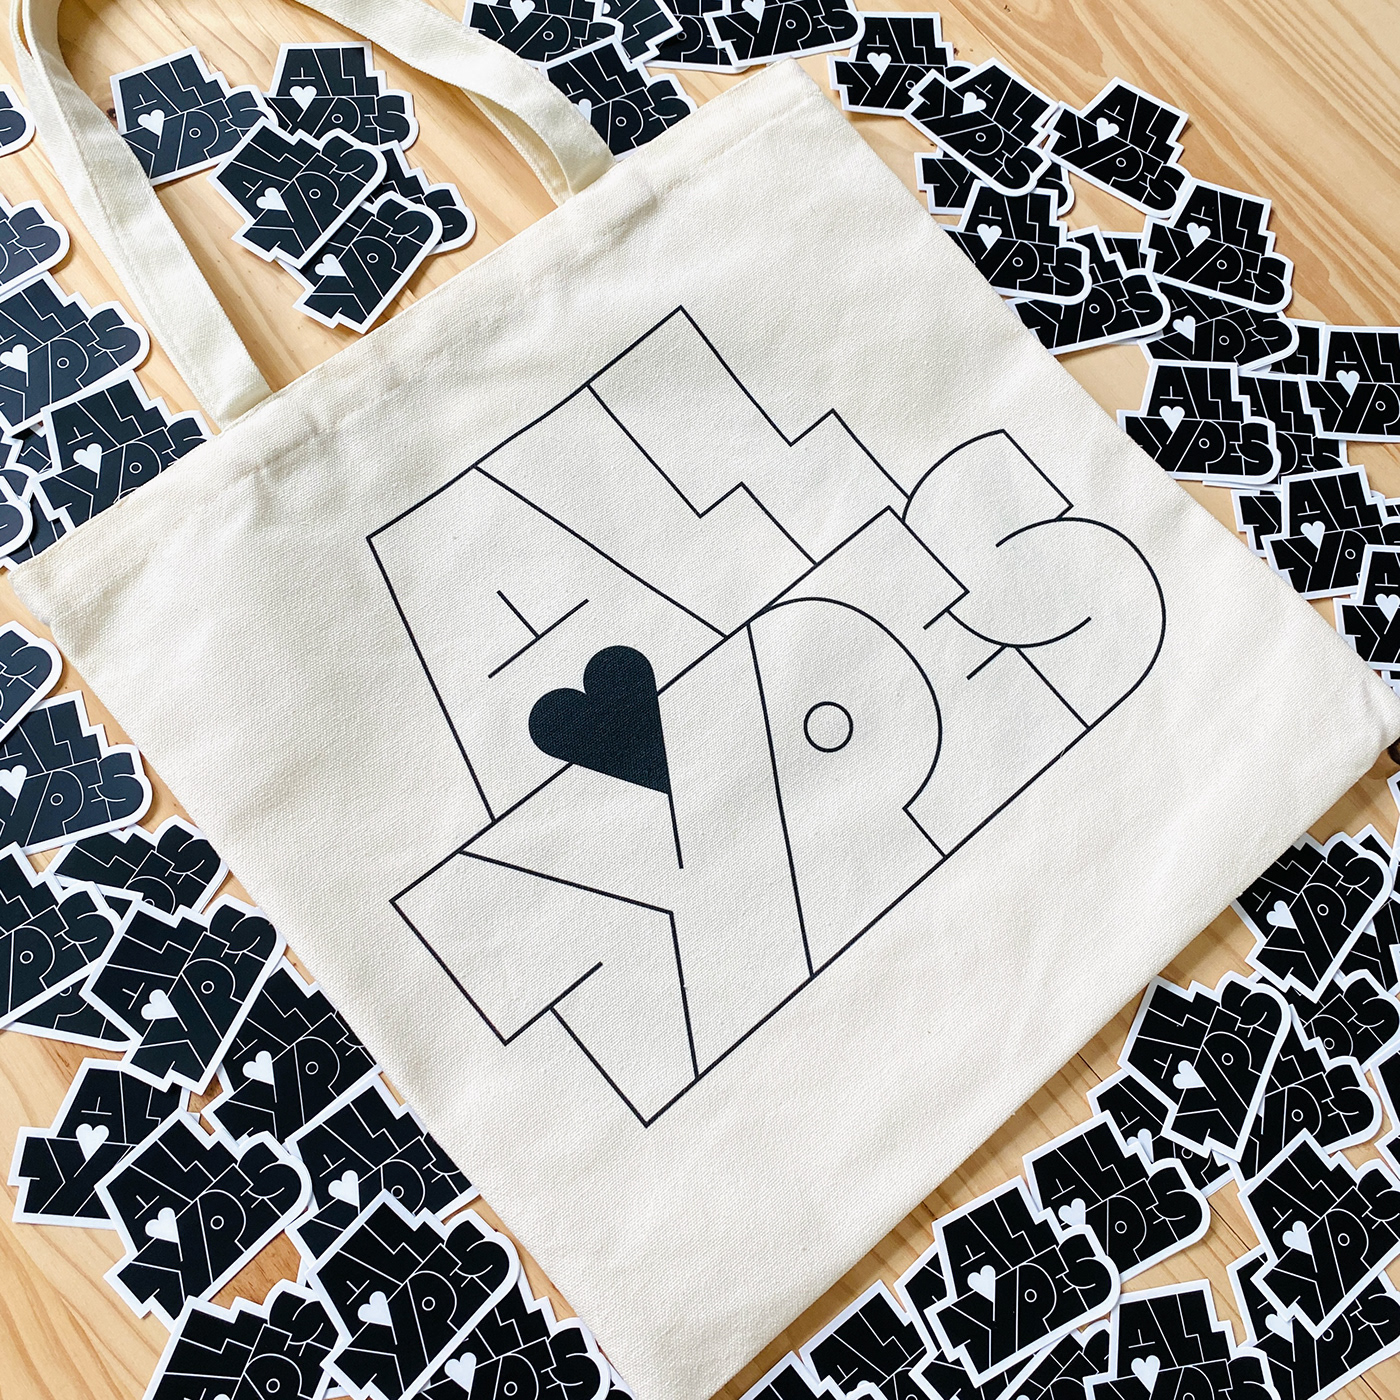 Tote type typography   heart goods product Tote Bag lettering Custom limited edition